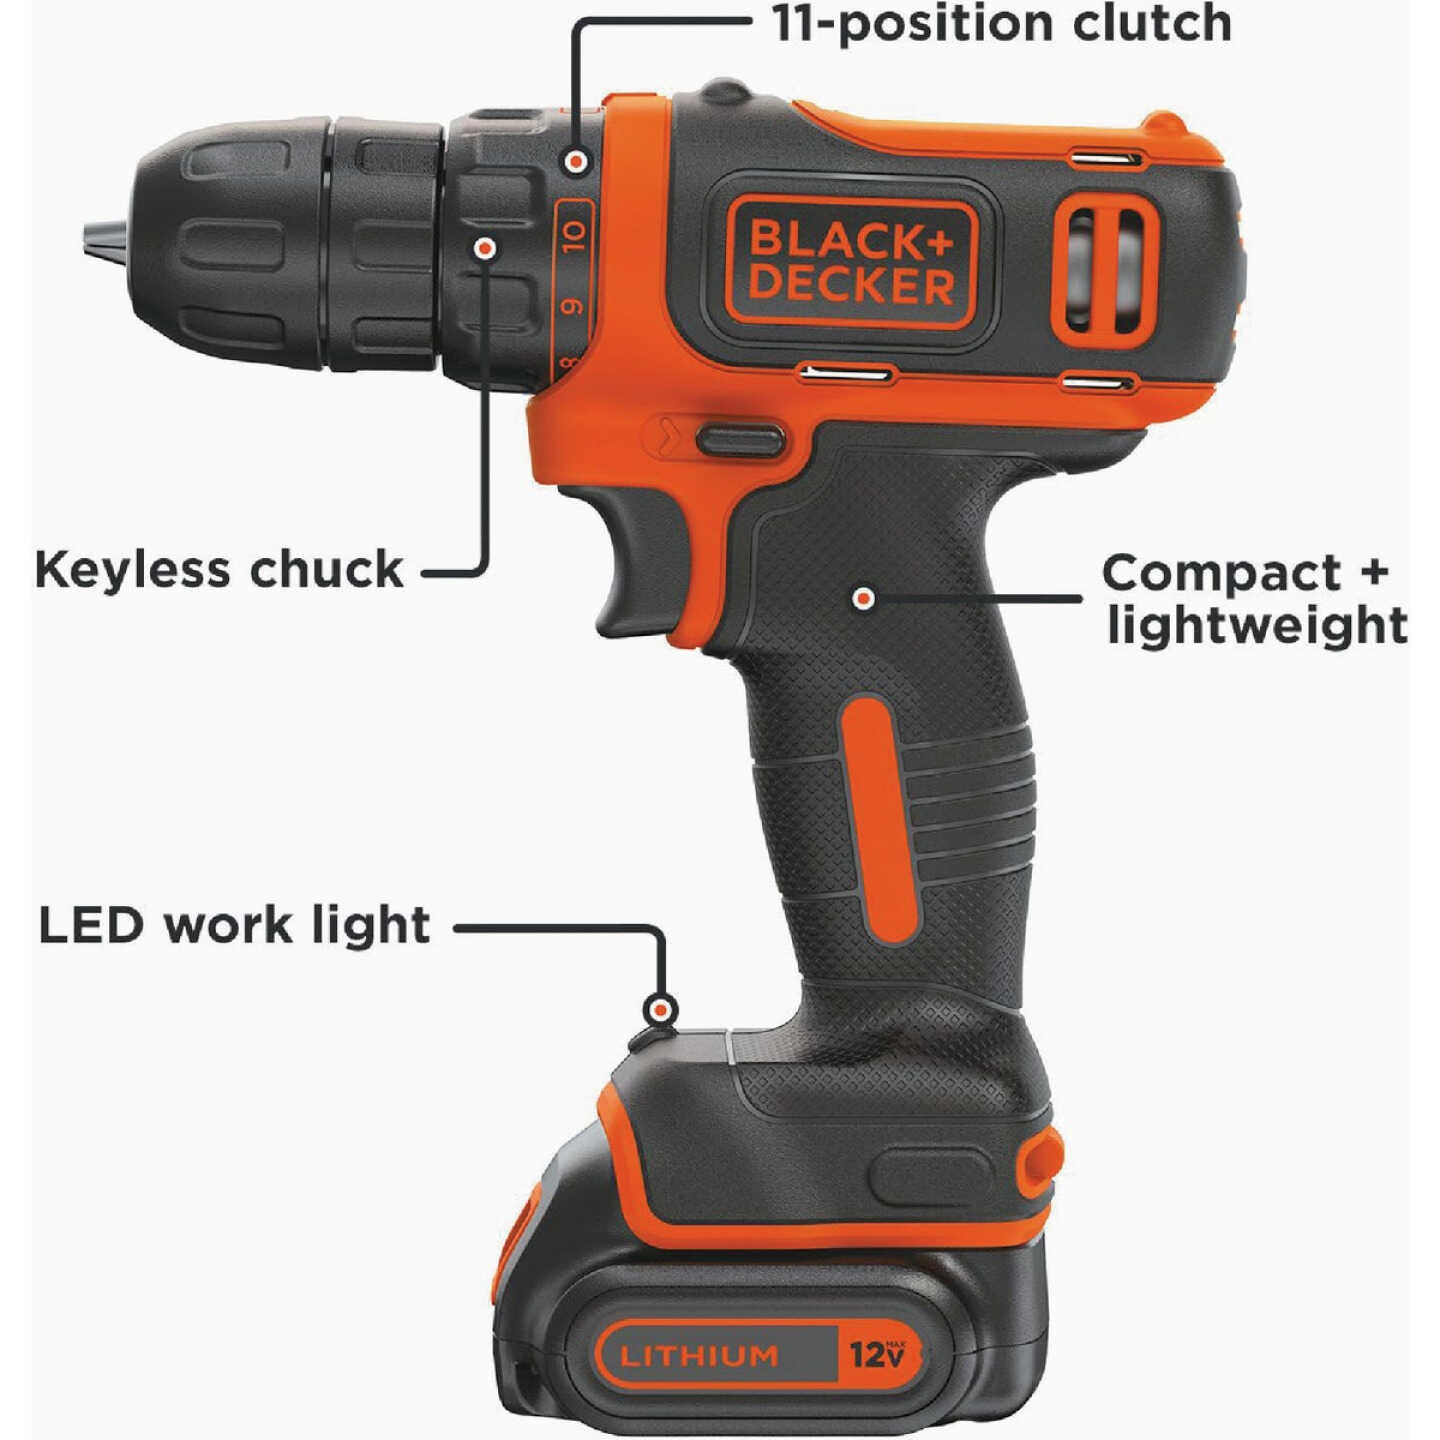 BLACK & DECKER 3.6-volt 3/8-in Cordless Drill (Charger Included